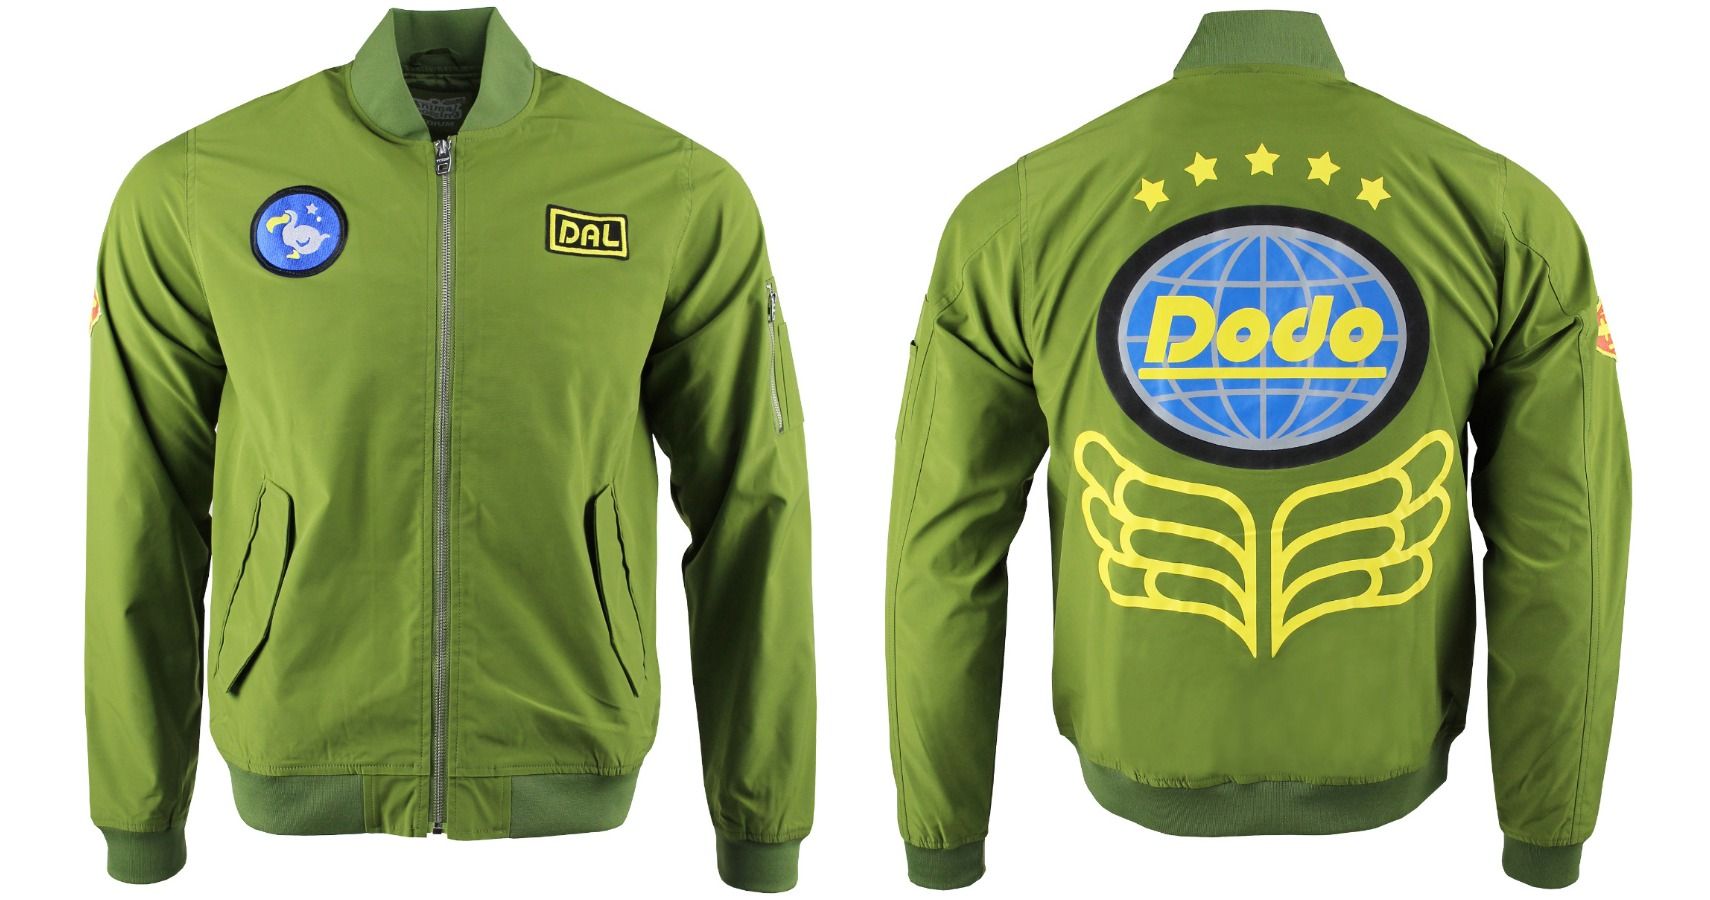 Dodo Airlines jacket